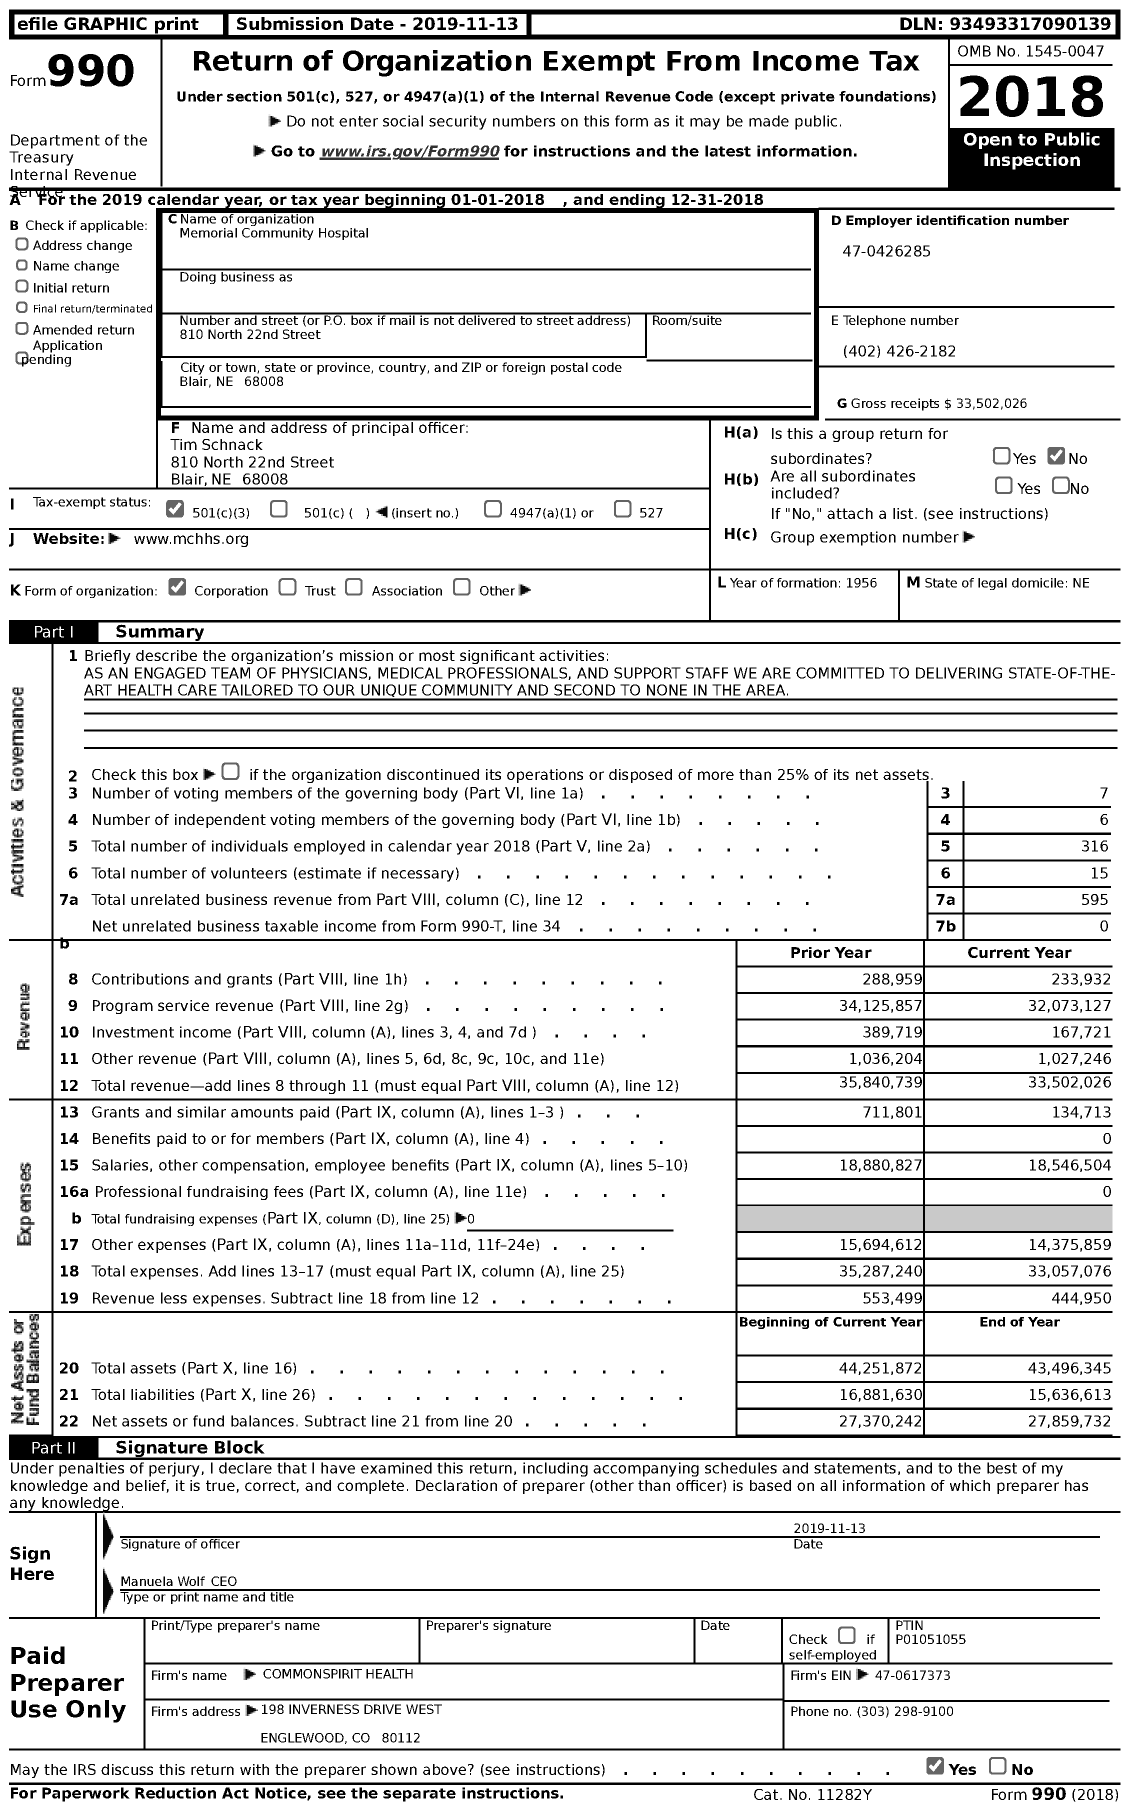 Image of first page of 2018 Form 990 for Memorial Community Hospital (MCH&HS)